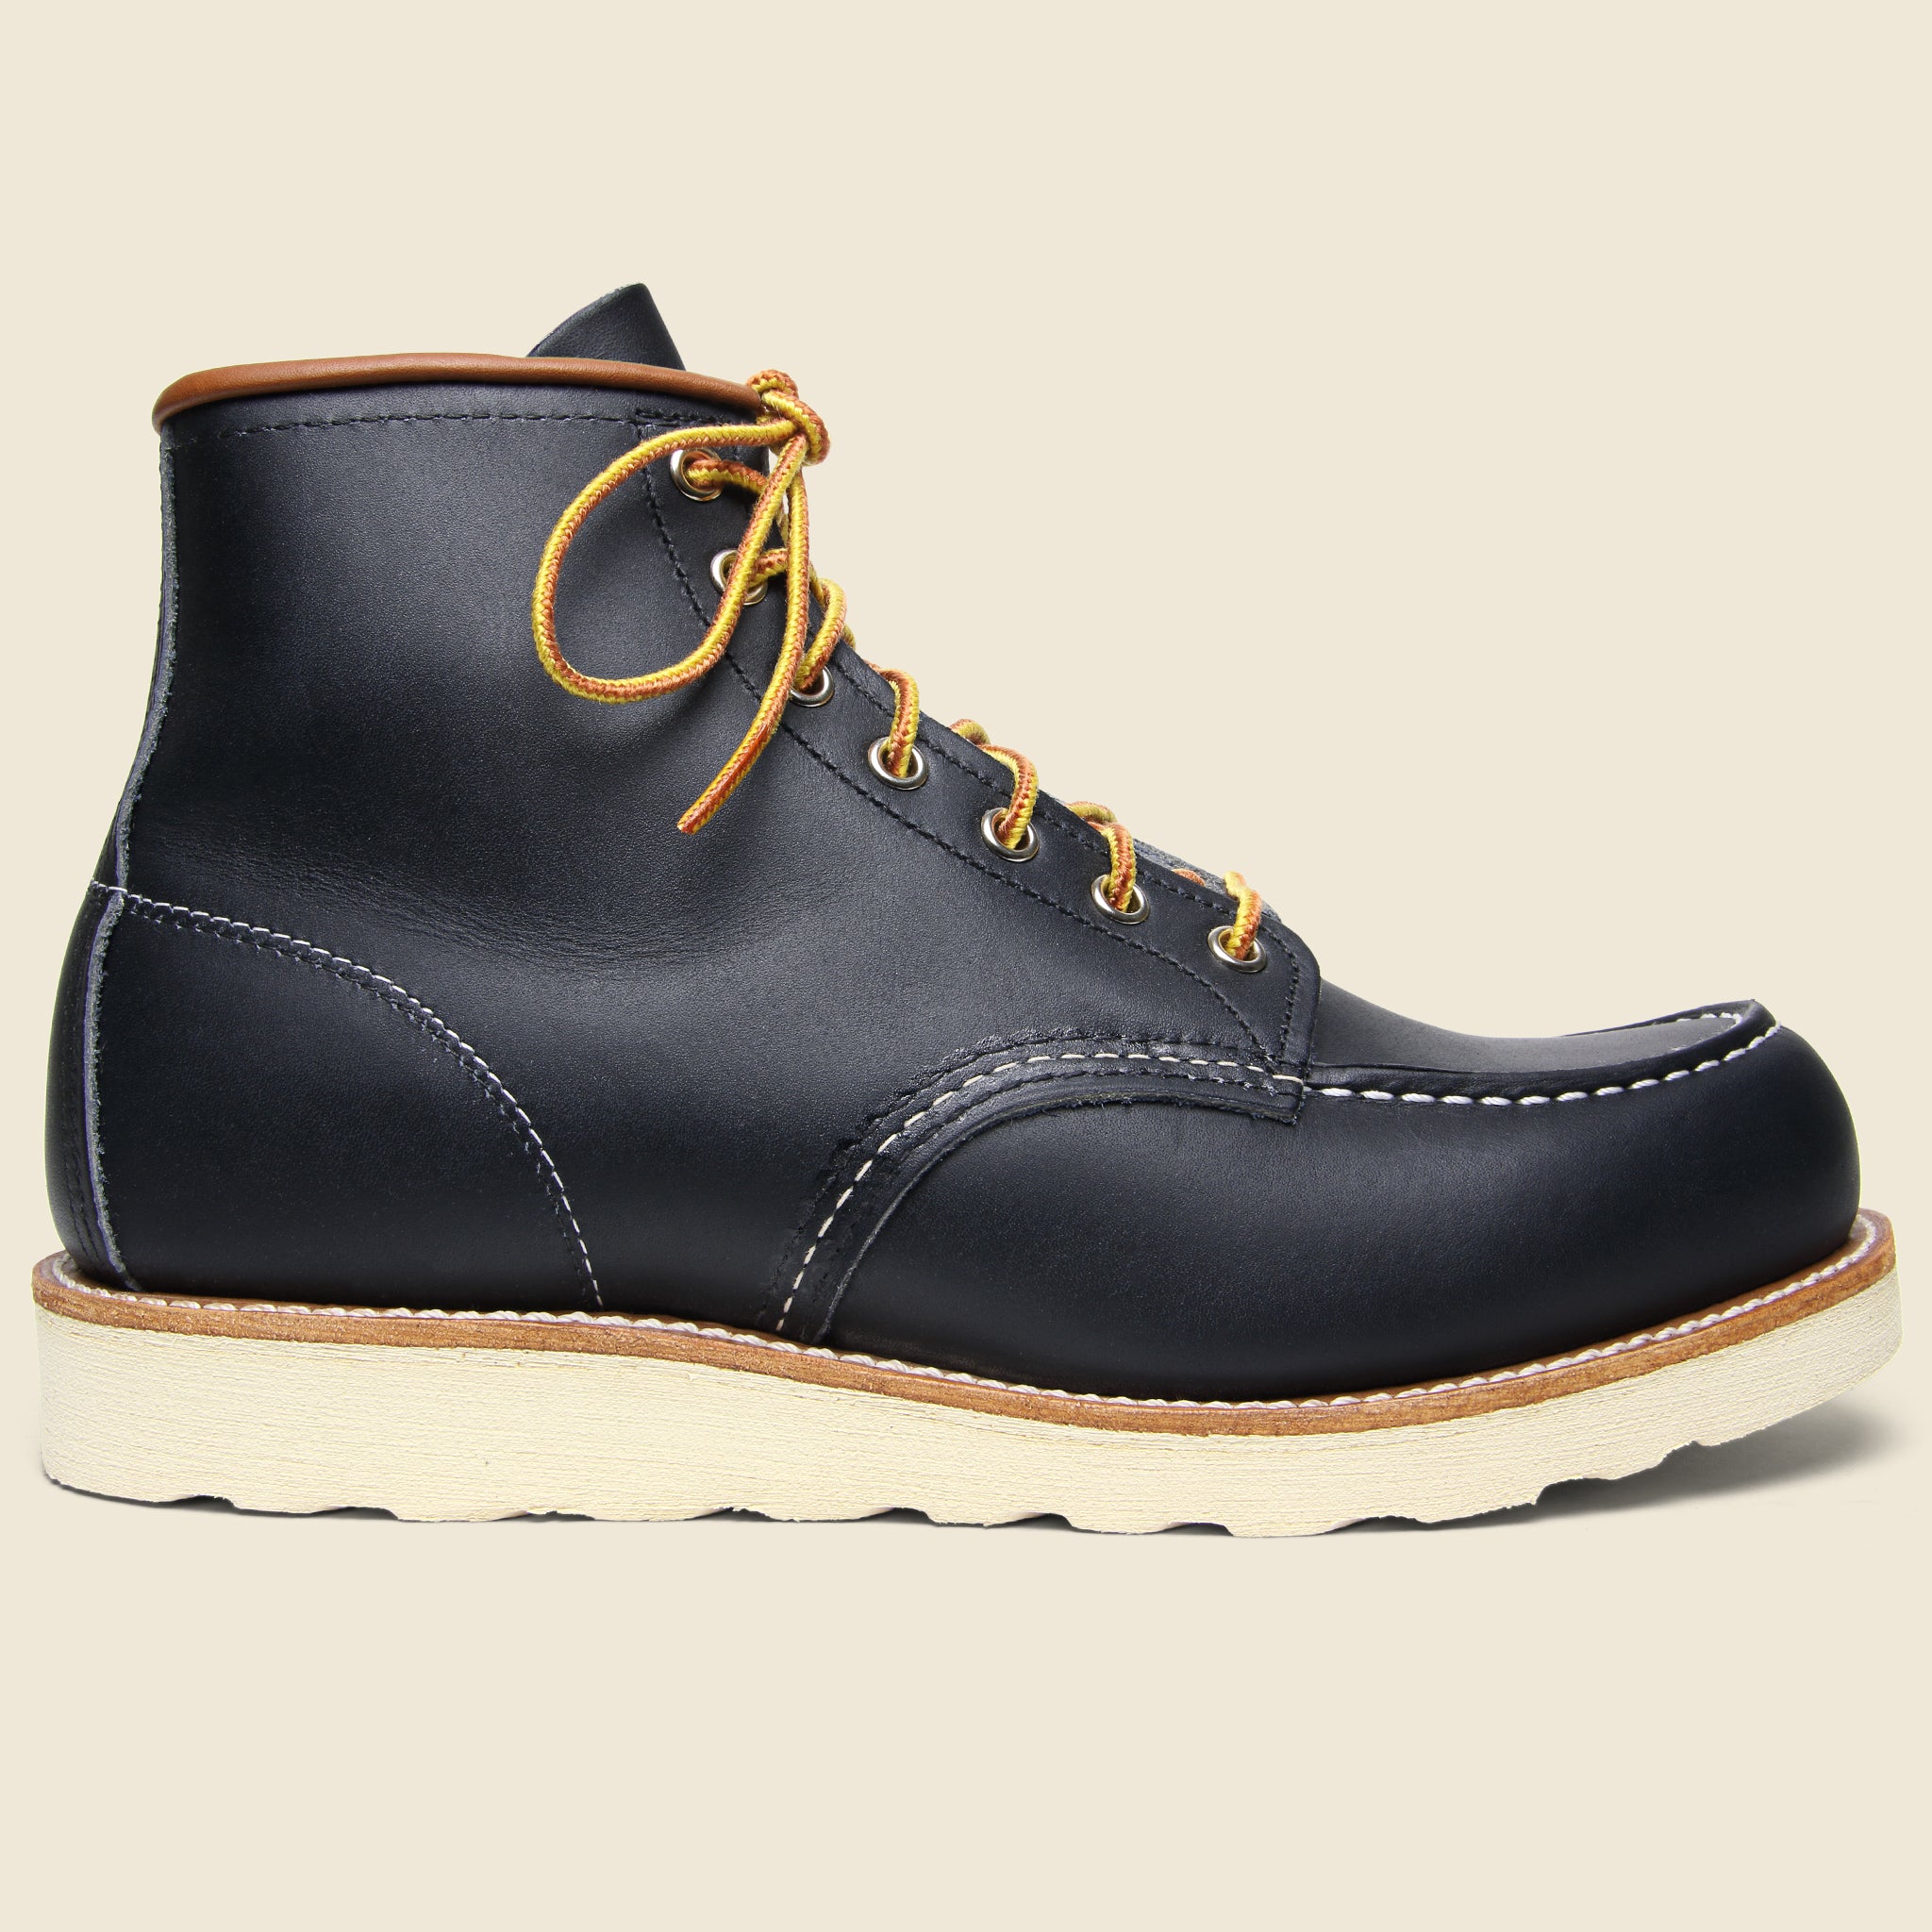 navy red wing boots